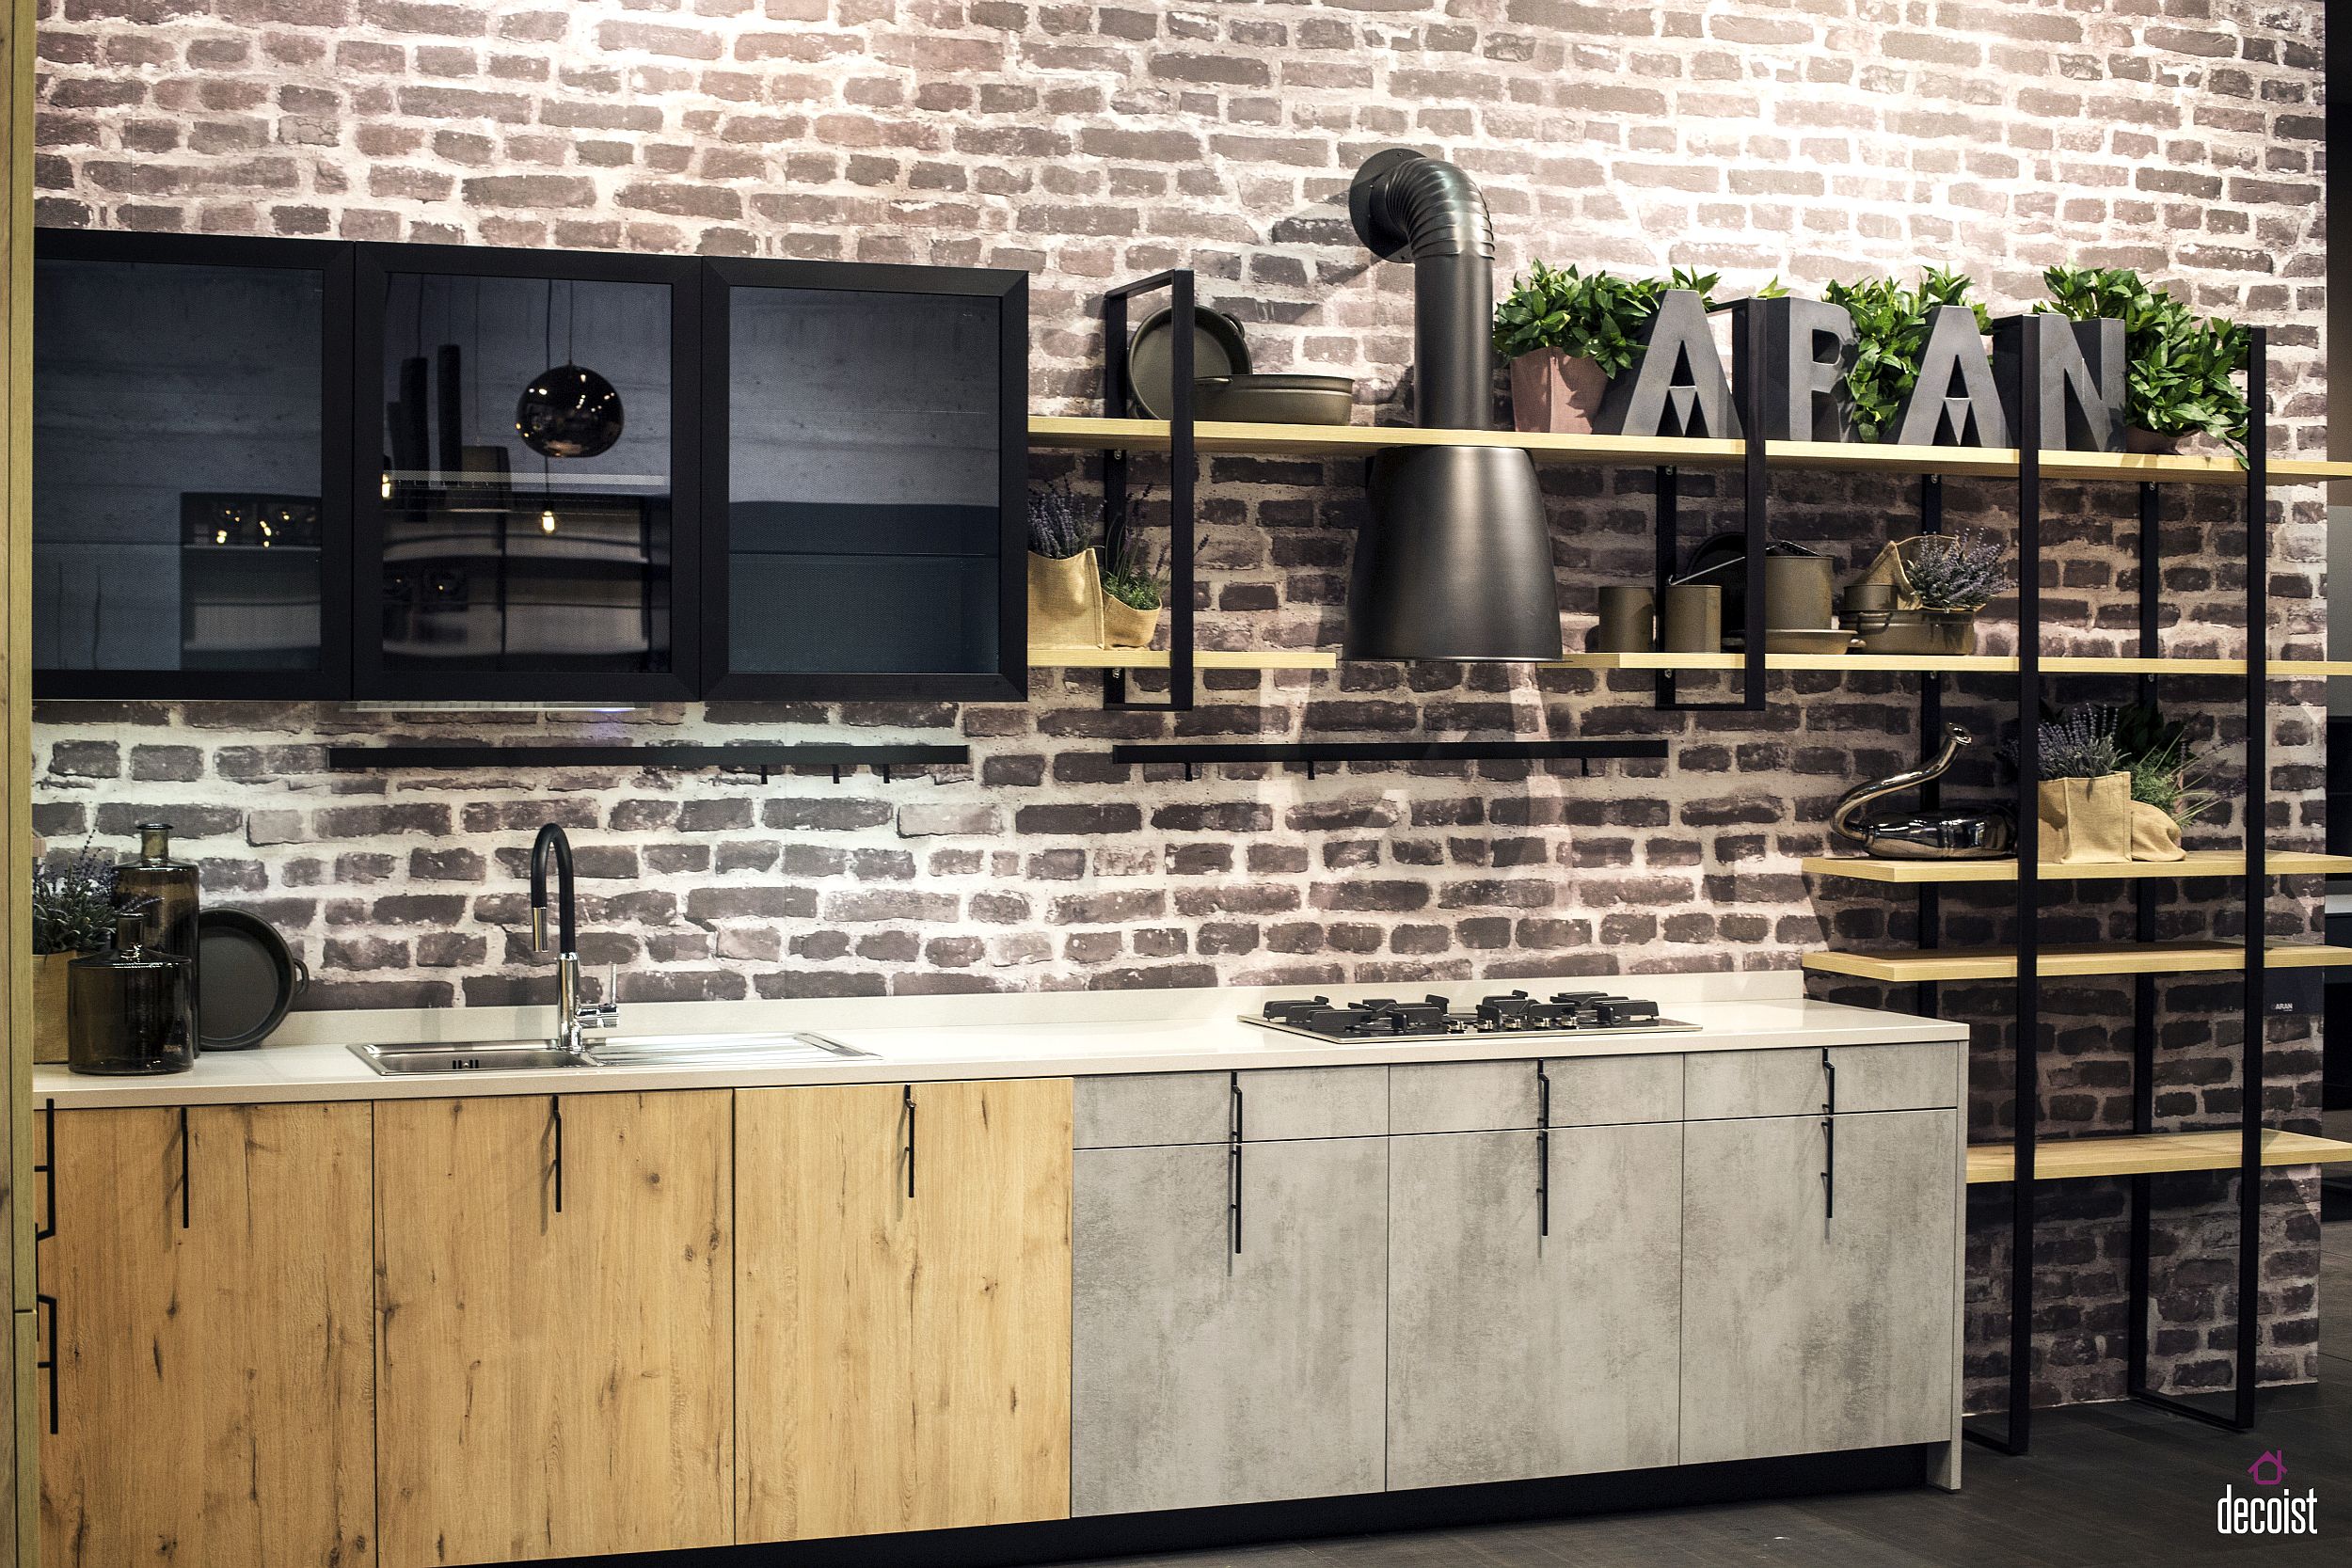 Metallic-frame-and-wooden-boards-combine-to-shape-an-industrial-style-open-shelving-in-the-kitchen